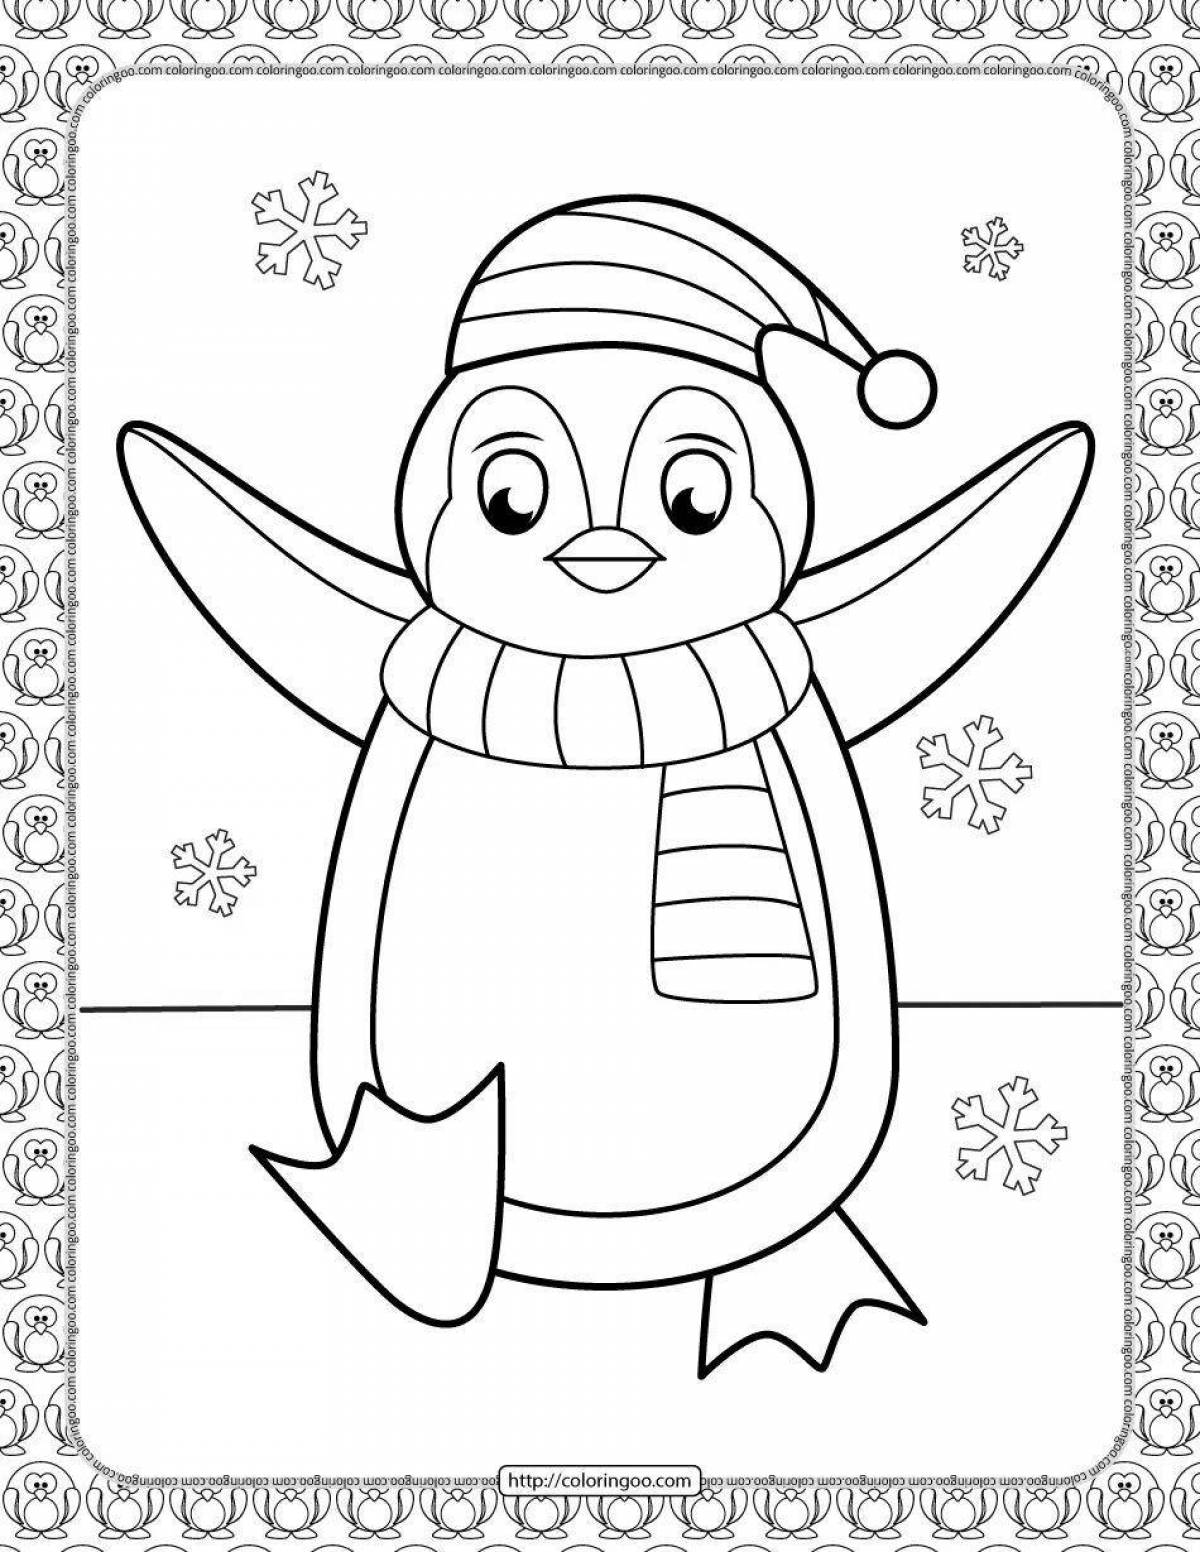 Coloring penguin nice